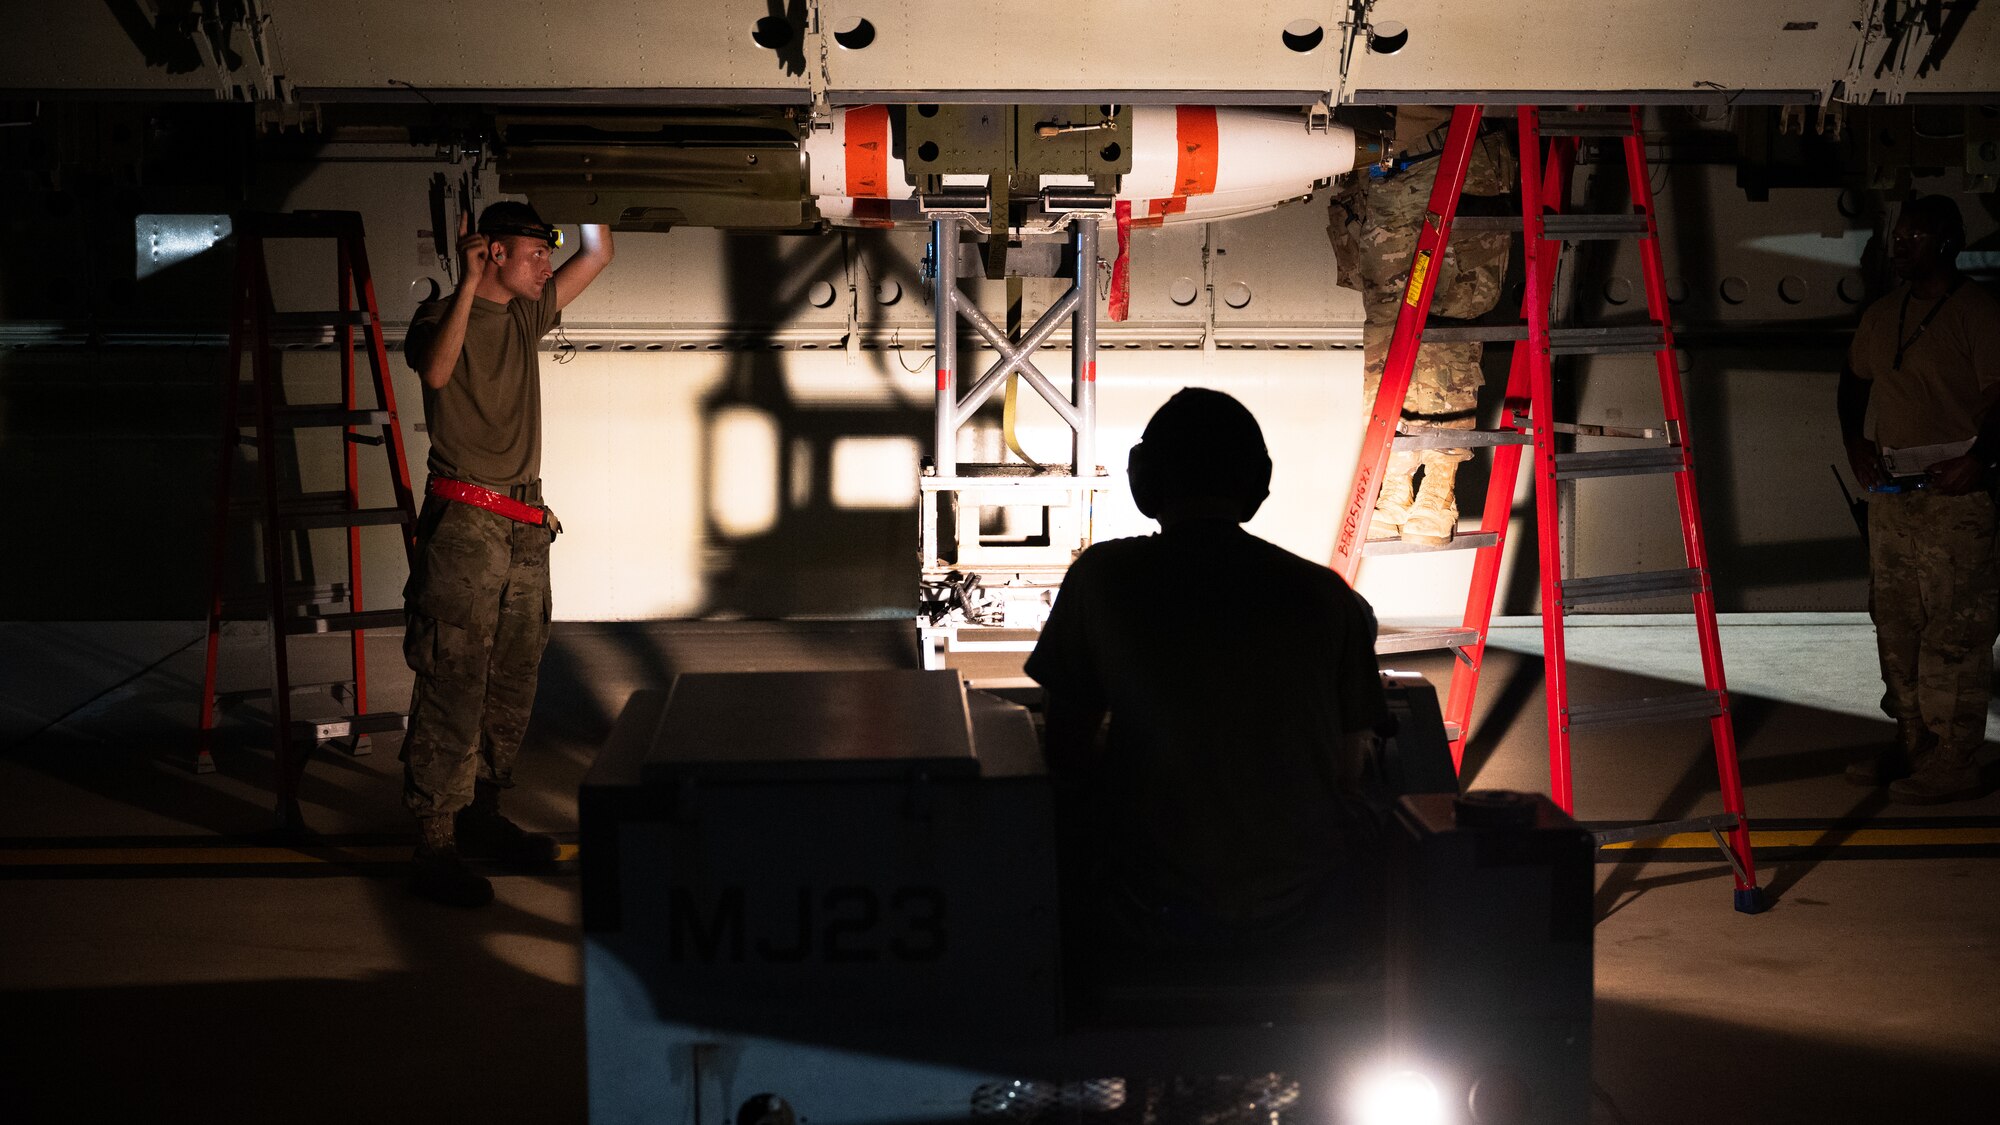 A weapons load crew team from the 2nd Aircraft Maintenance Squadron load a Mk-62 Quickstrike naval mine onto a B-52H Stratofortress in support of a training exercise at Barksdale Air Force Base, Louisiana, Aug. 25, 2021. The B-52 has the ability to carry and employ naval mines, as well as conventional and nuclear weapons. (U.S. Air Force photo by Senior Airman Jacob B. Wrightsman)